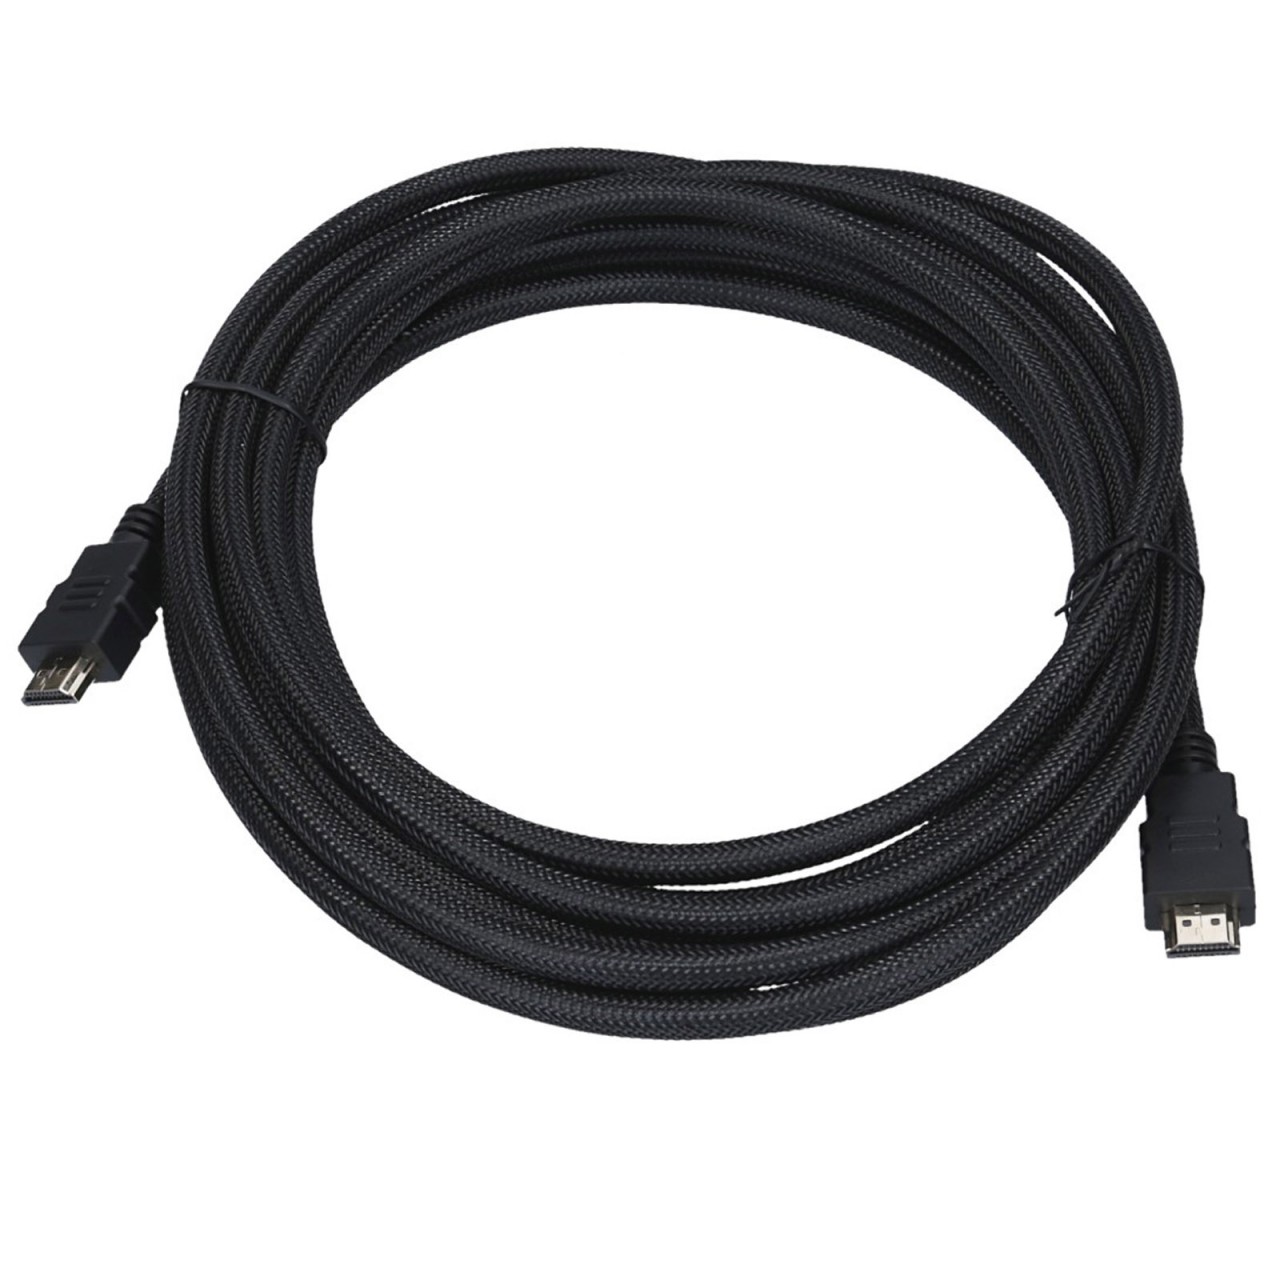 Hdmi 2.0 4k cable 1m, incl. nylon braided design jacket